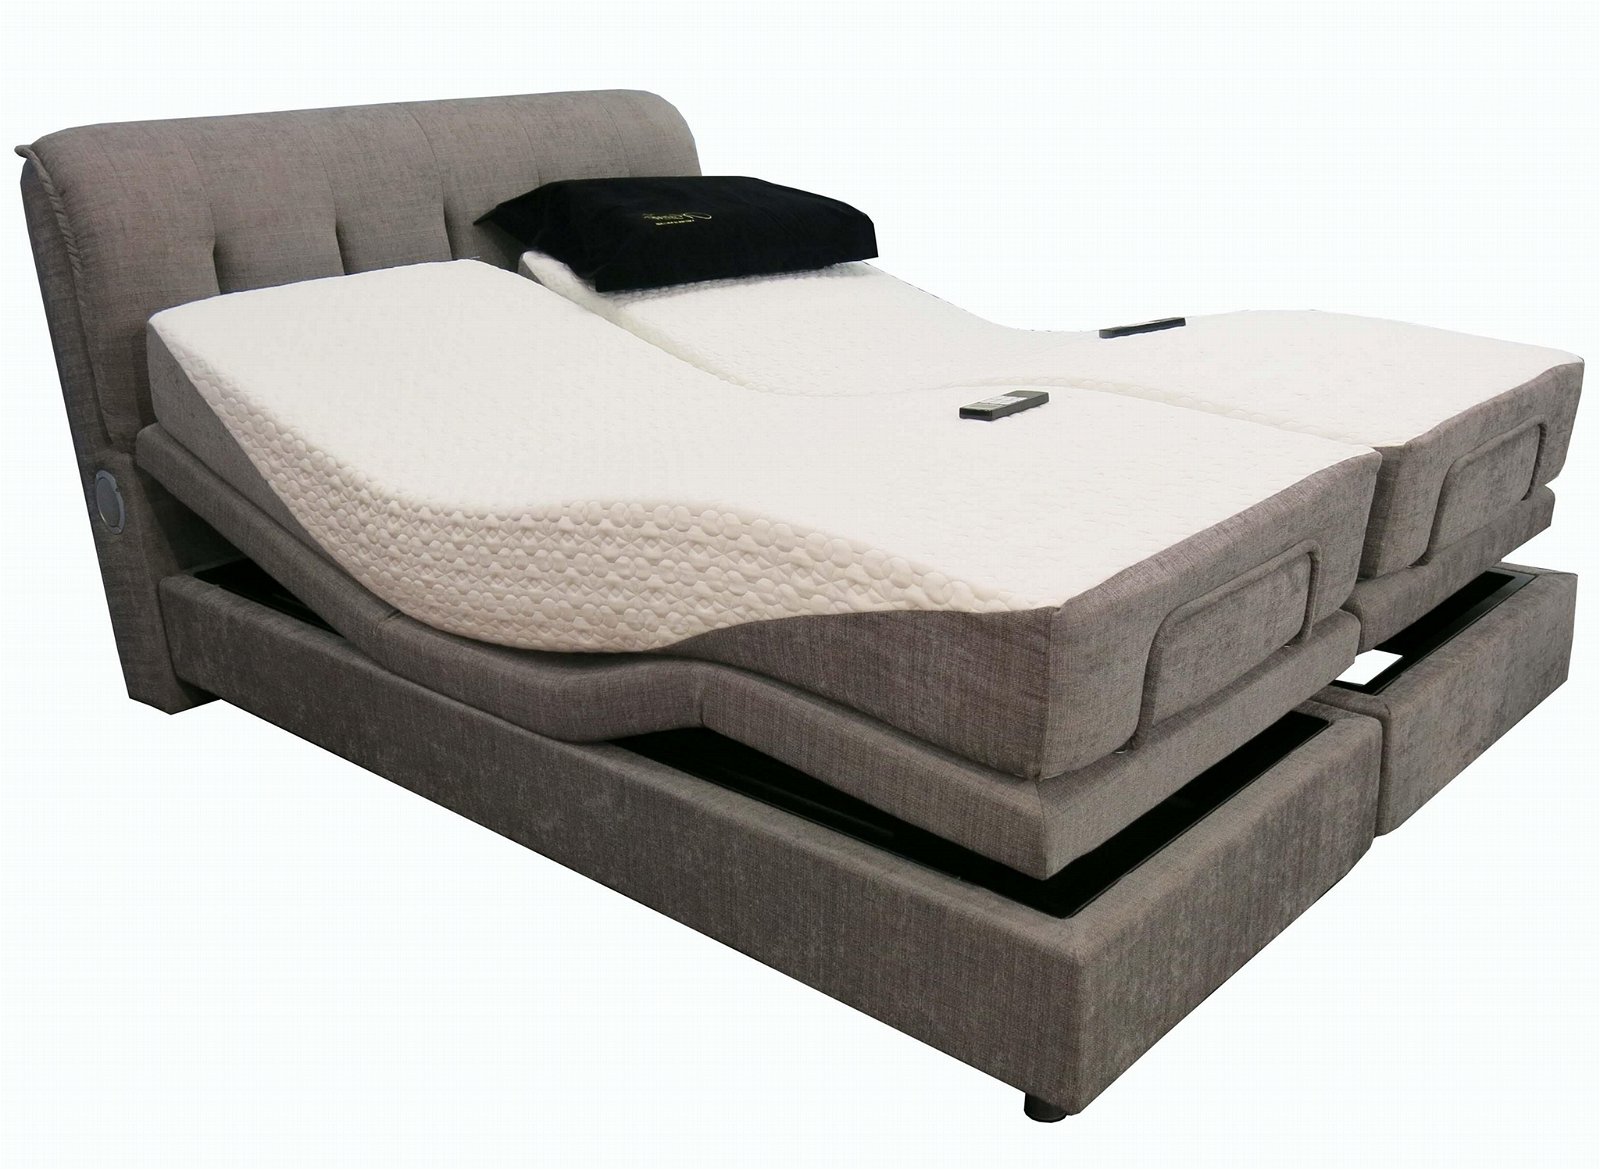 King Size Bed With Adjustable Base 2